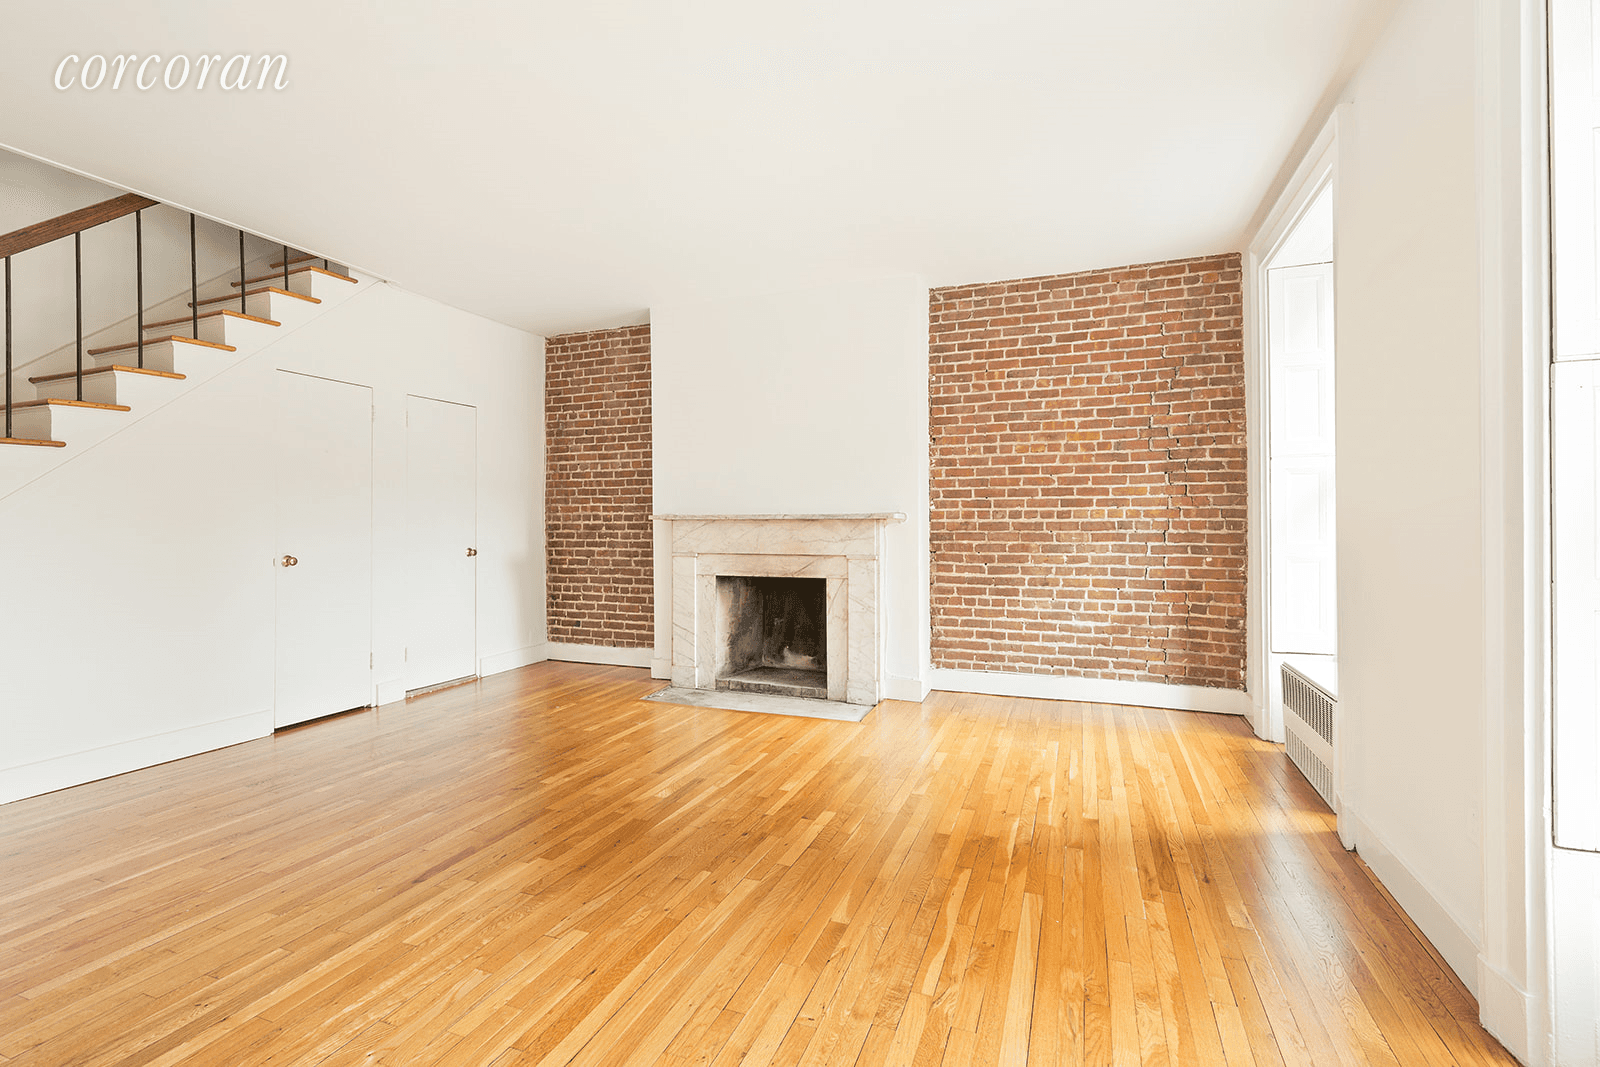 Do not miss this truly special opportunity to live in one of the Grand Dame's of Brooklyn Heights on majestic and tree lined Pierrepont Street.